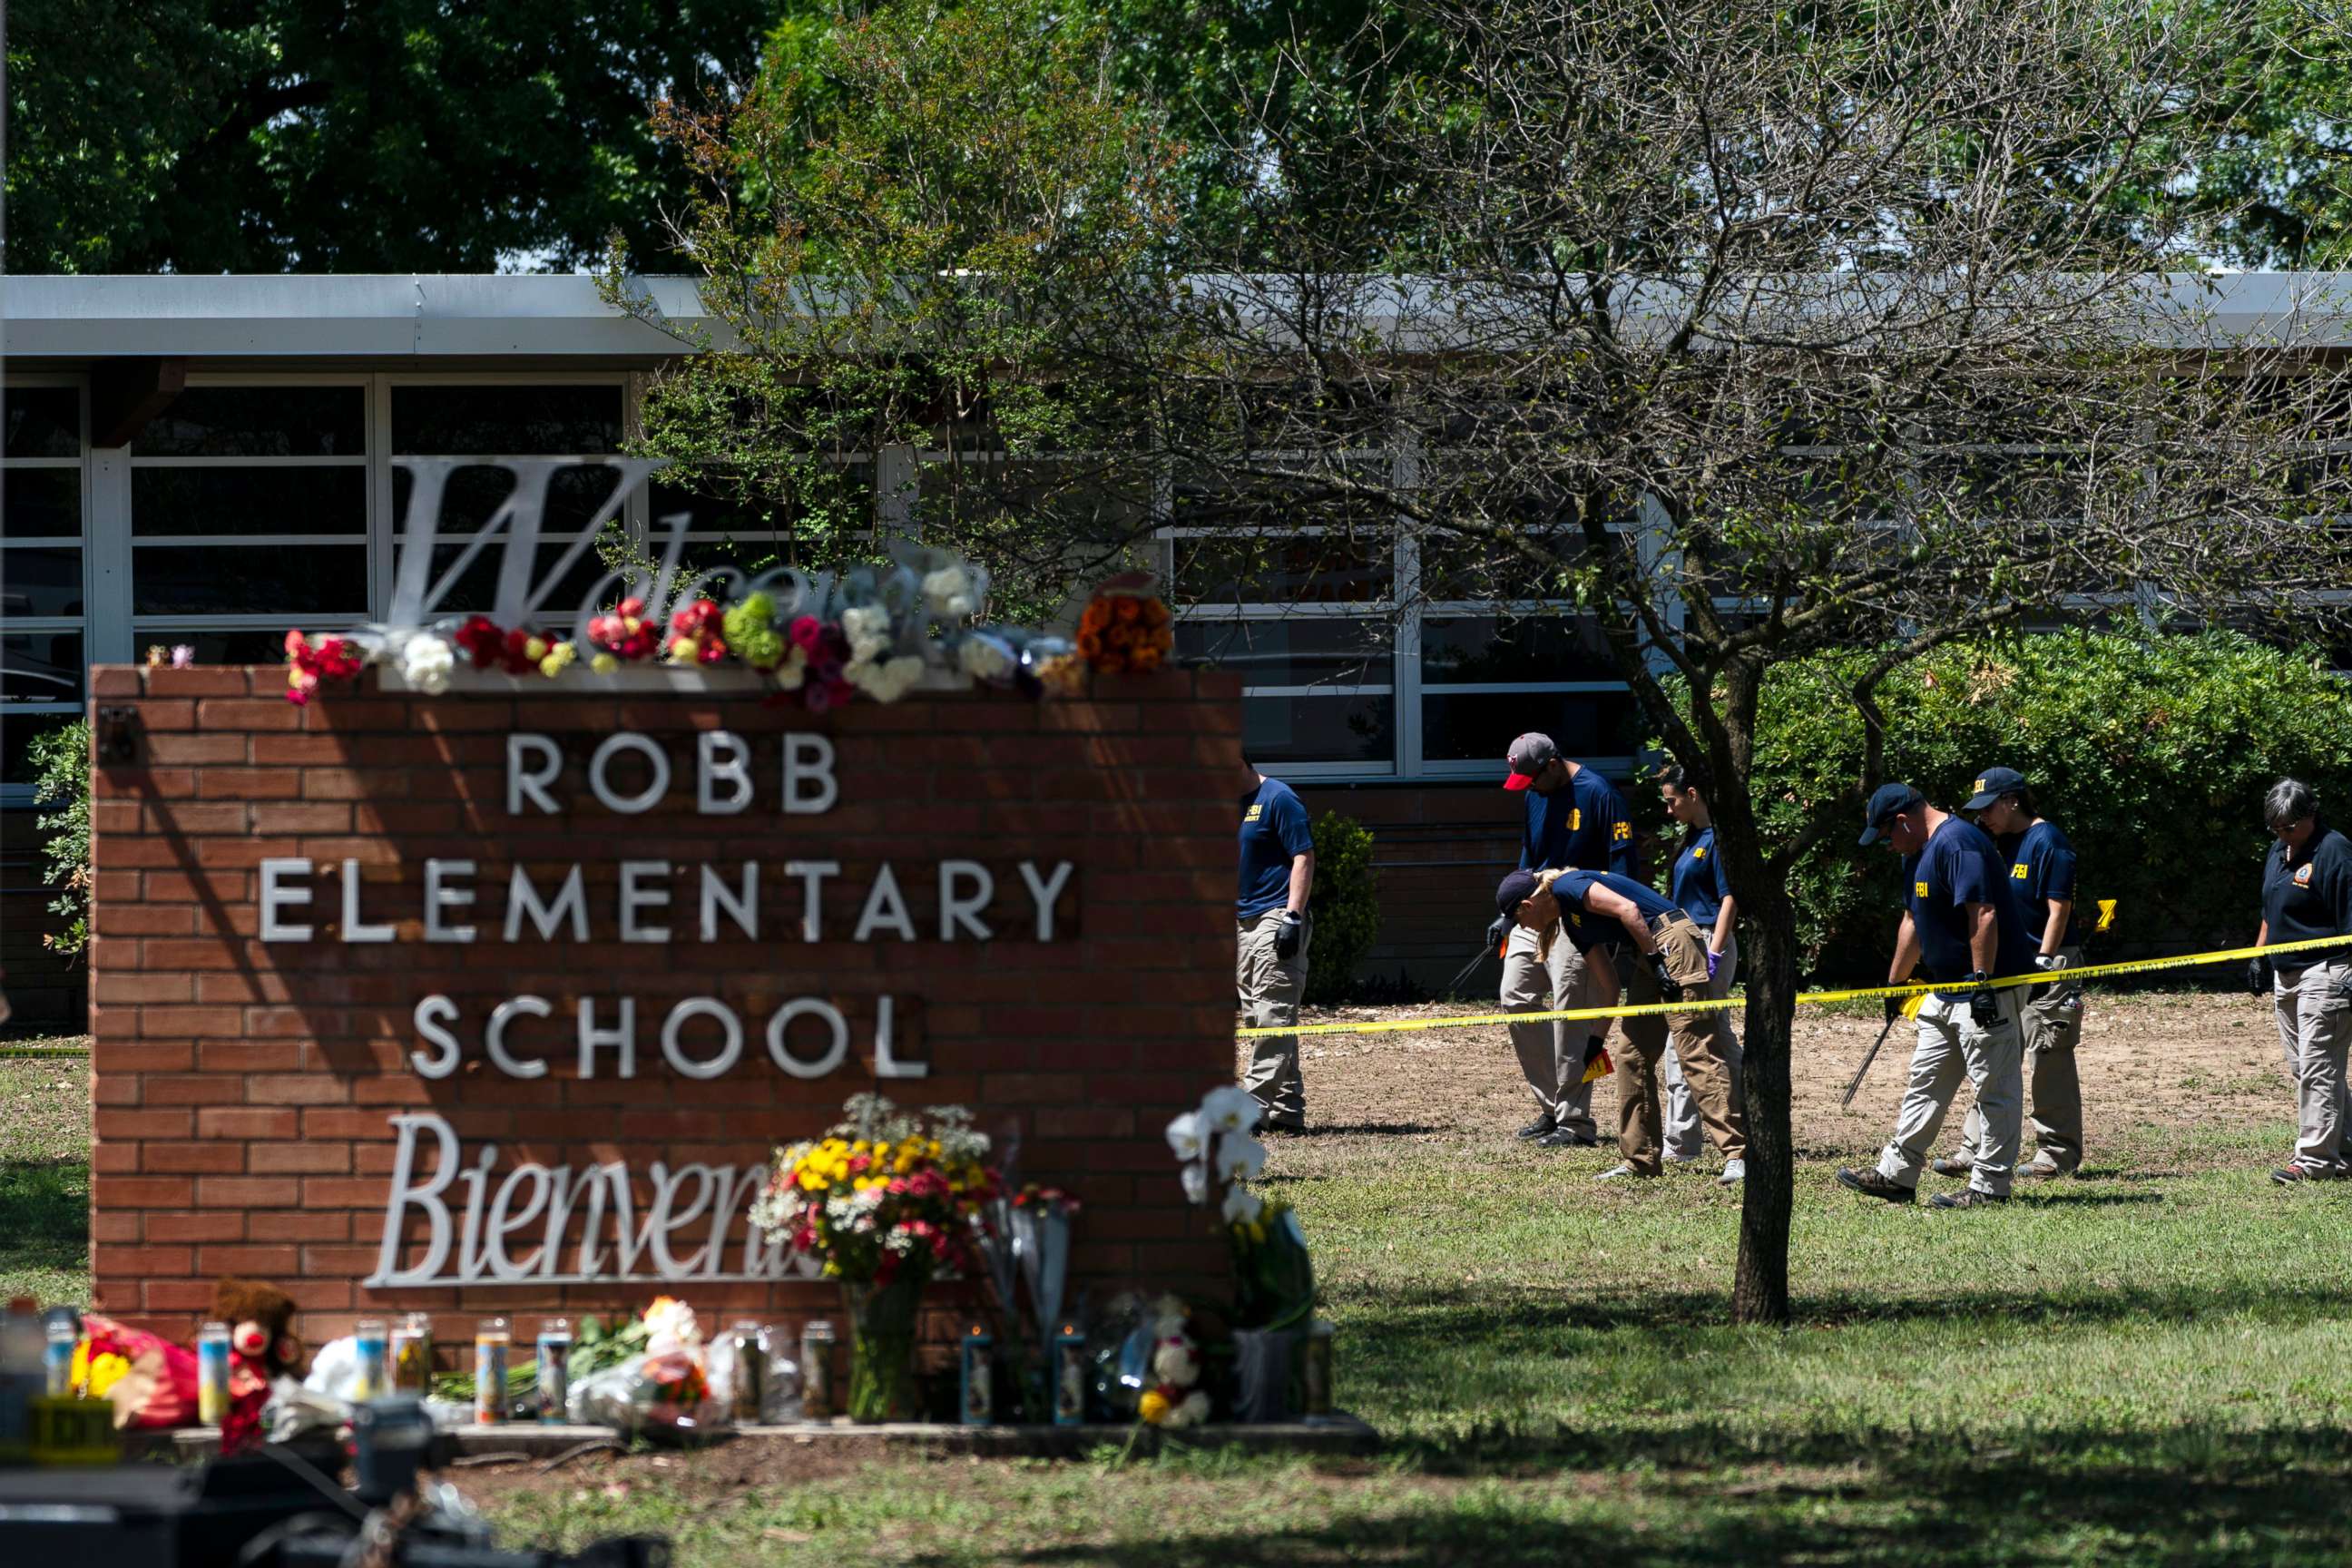 PHOTO: Investigators search for evidences outside Robb Elementary School in Uvalde, Texas, on May 25, 2022, one day after an 18-year-old gunman killed 19 students and two teachers.